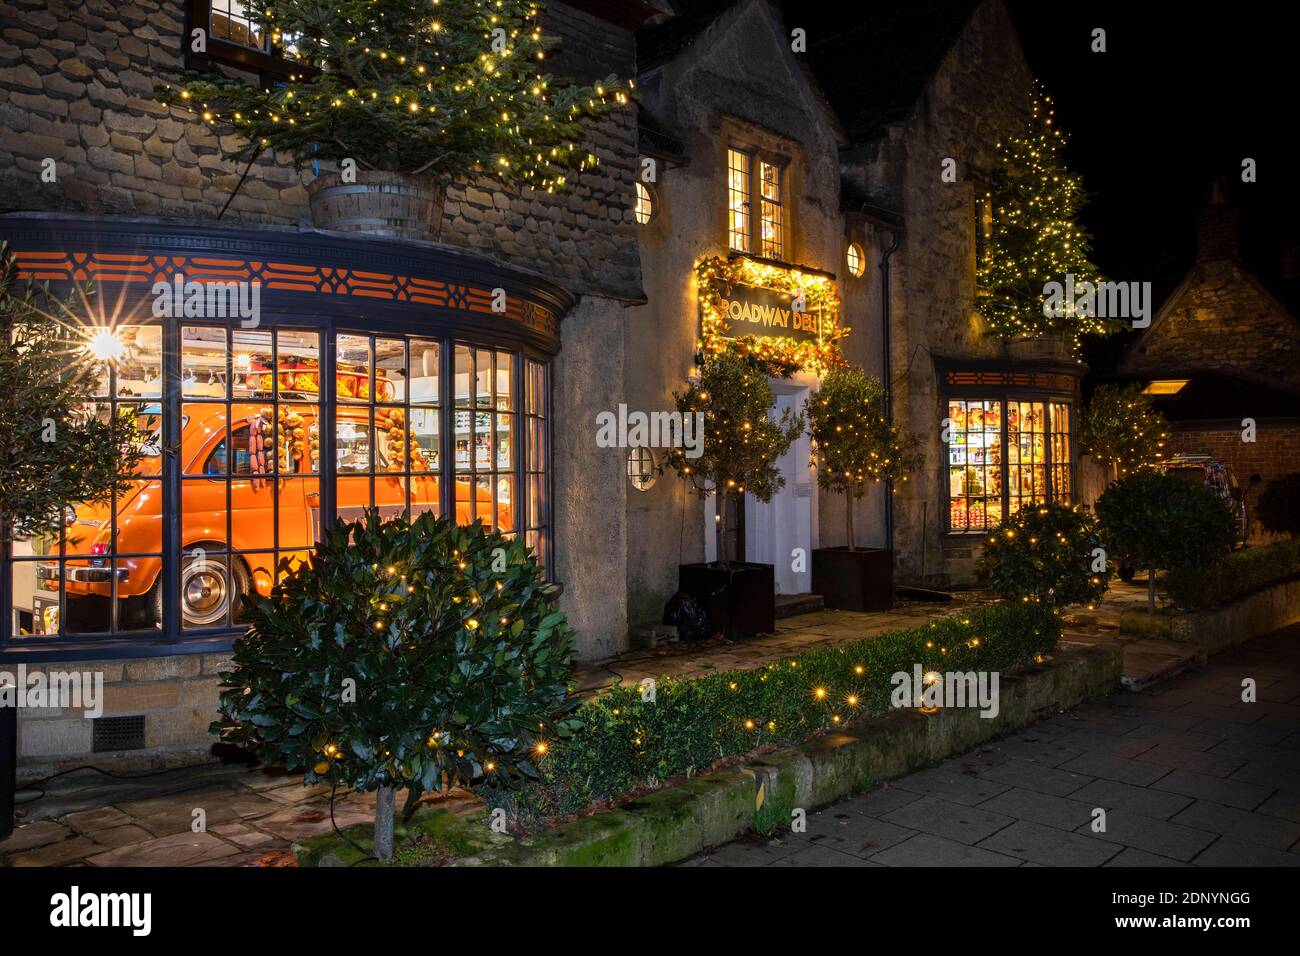 UK, Gloucestershire, Broadway, High Street, Broadway Deli illuminated for Christmas, with car in shop window Stock Photo